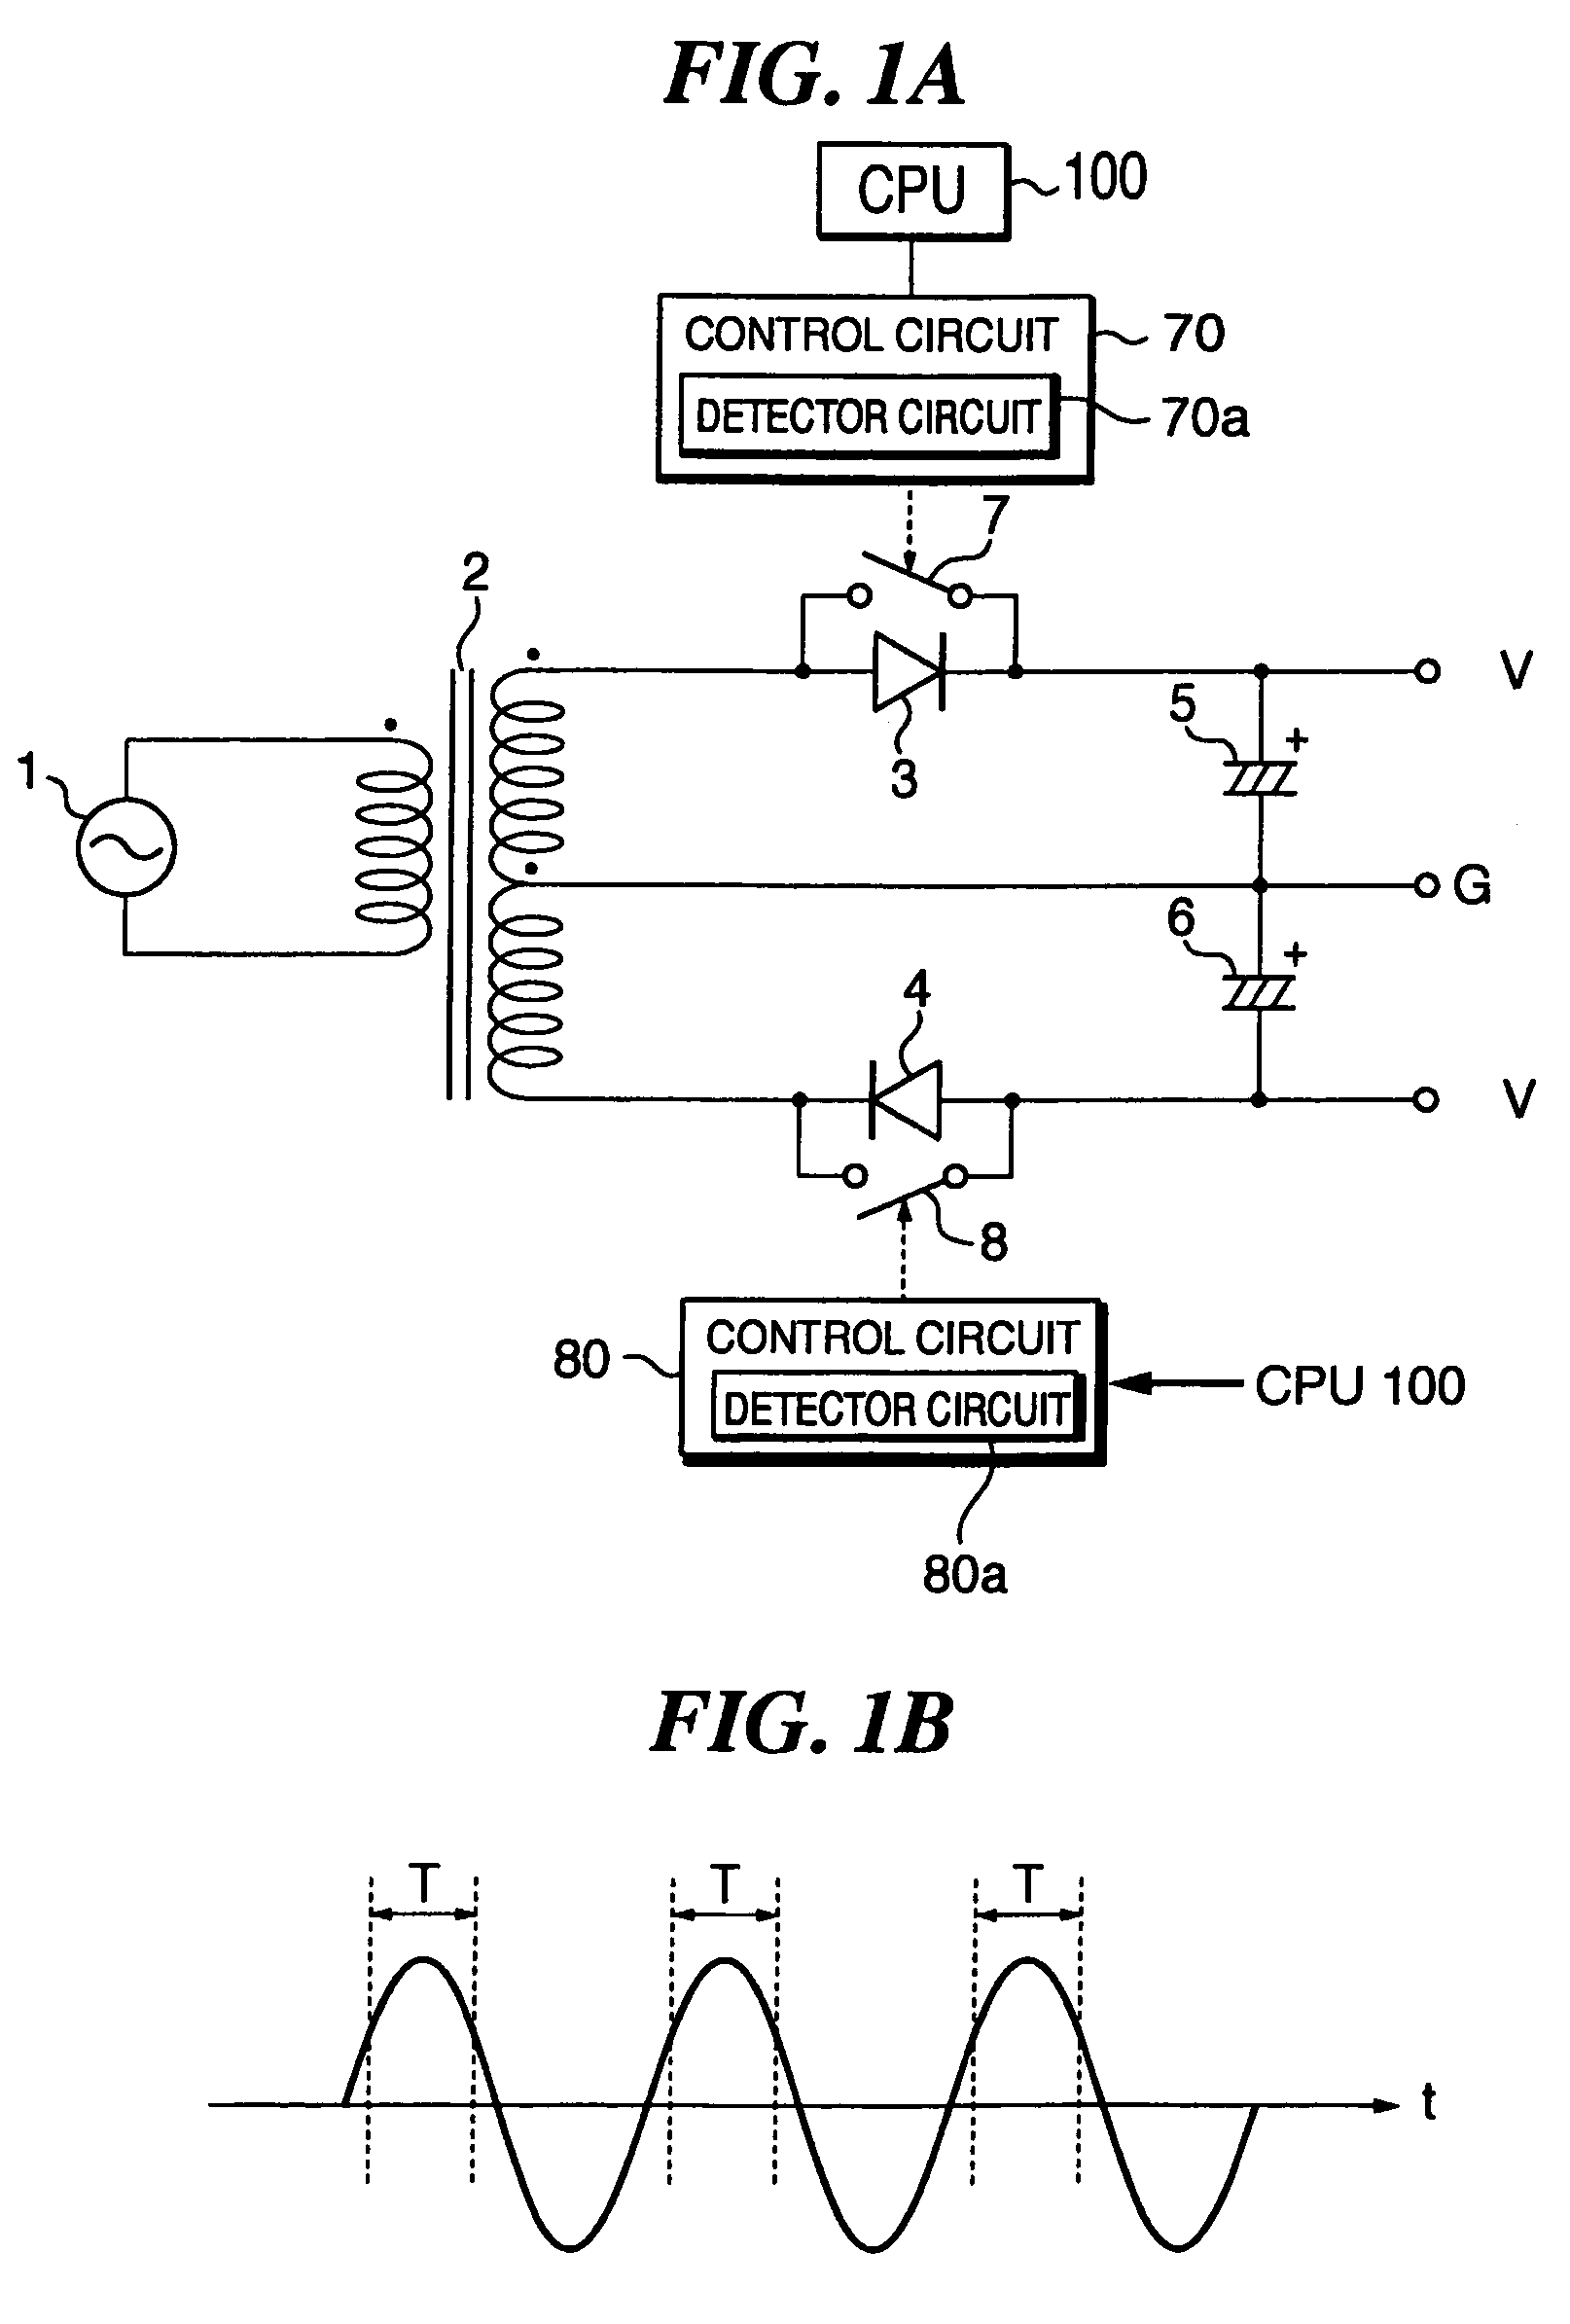 Capacitor-input positive and negative power supply circuit